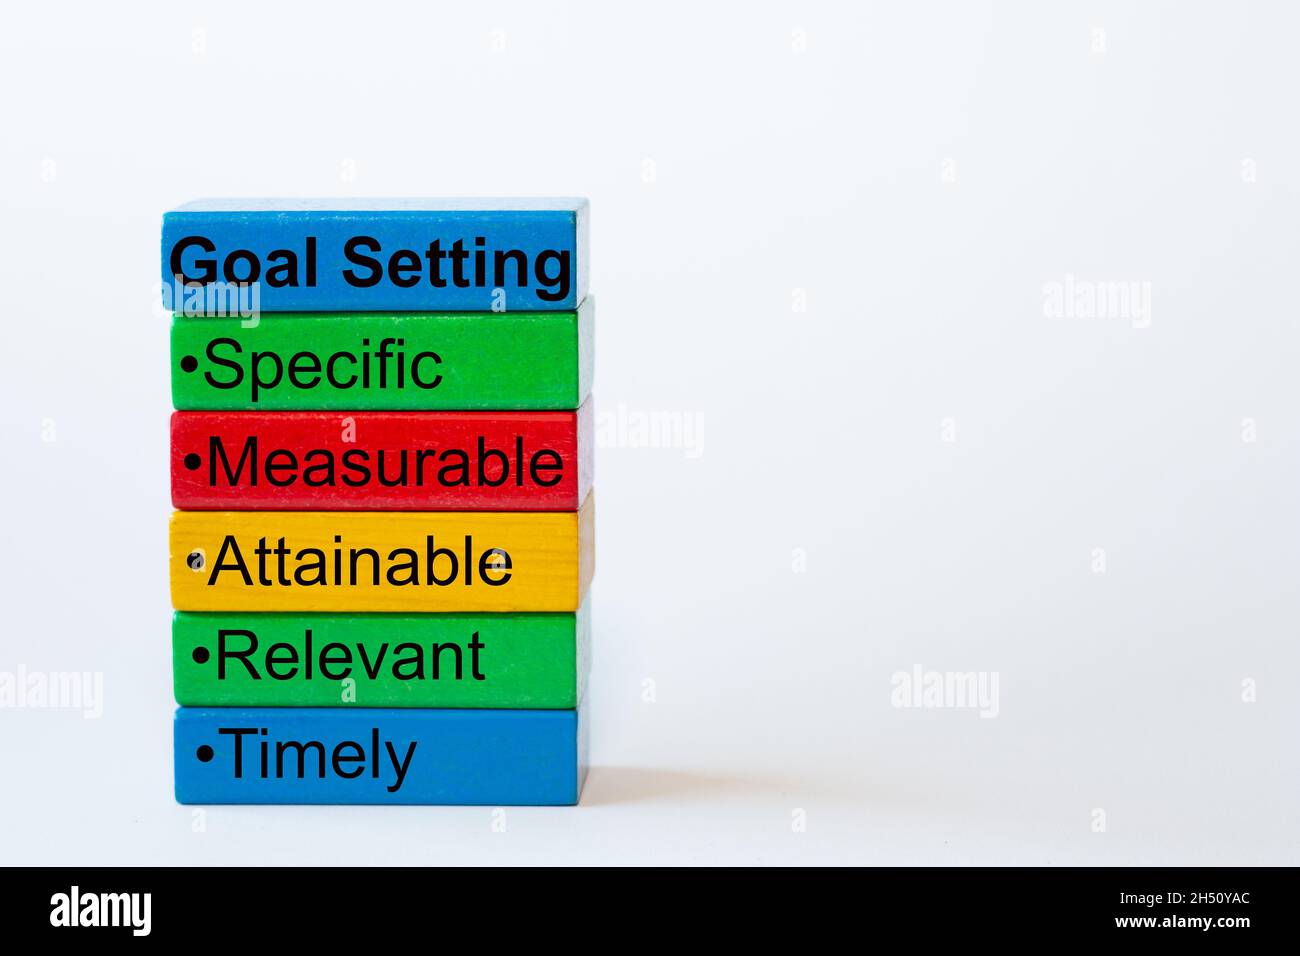 The words: Goal Setting, Specific, Measurable, Attainable, Relevant, Timely are written on colorful blocks Stock Photo